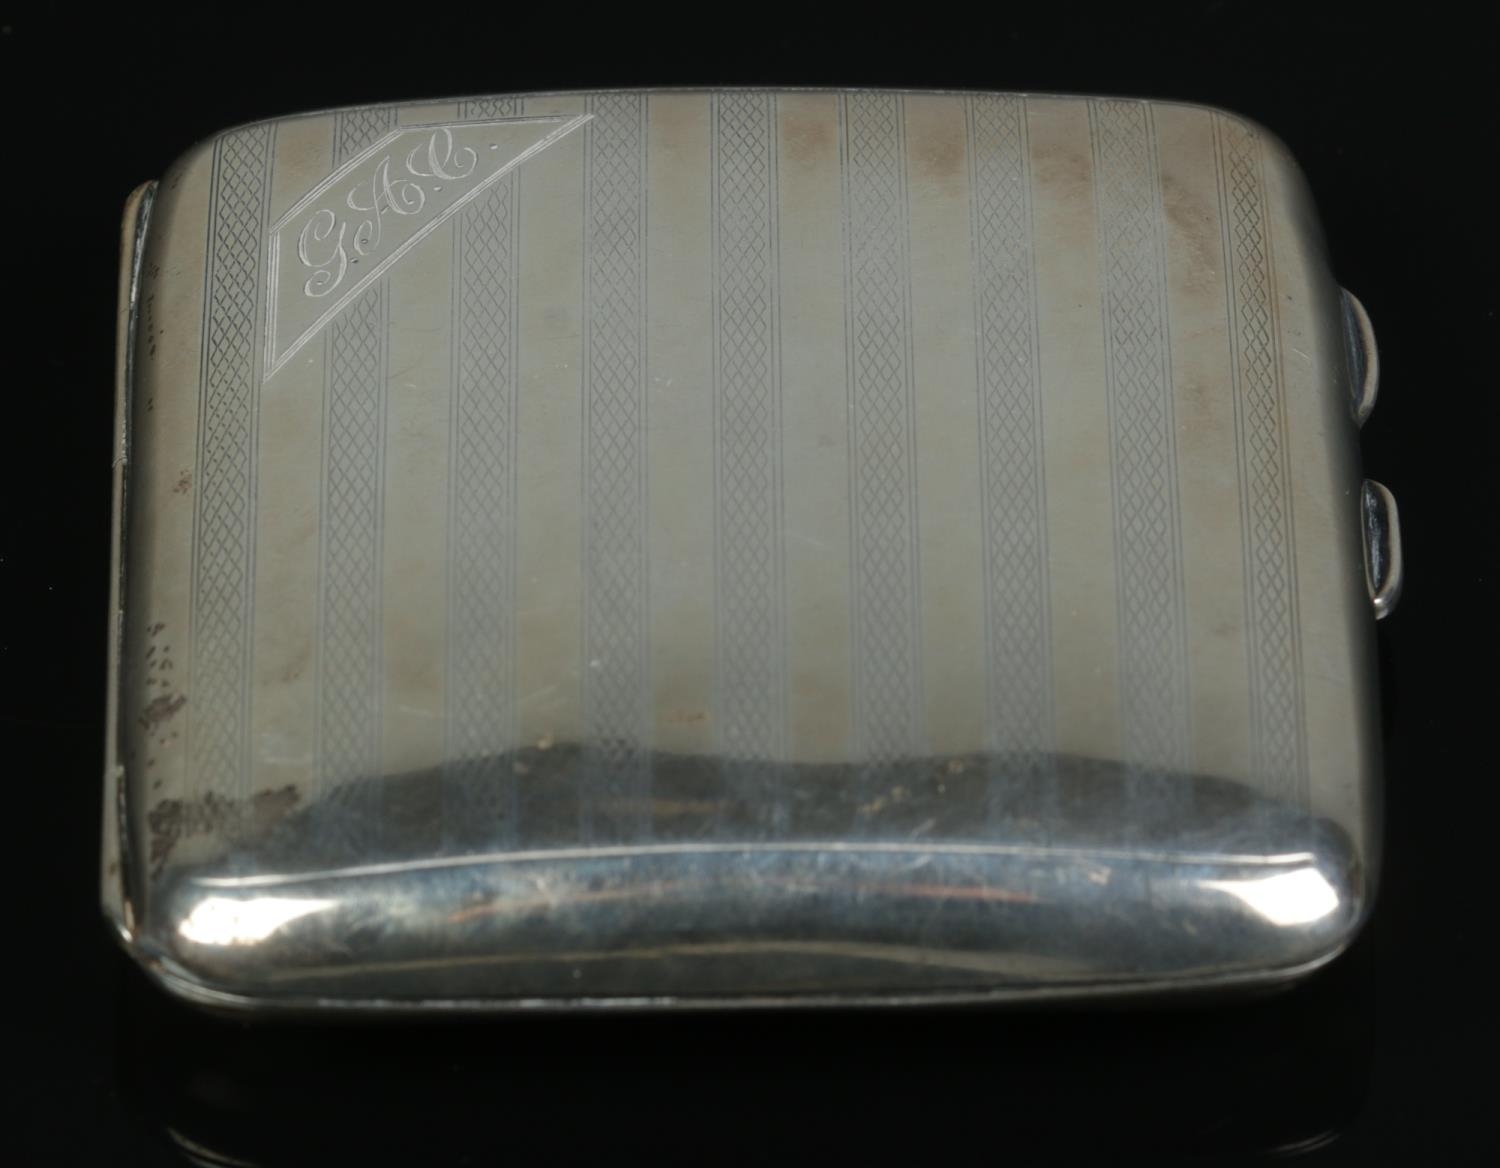 A George V silver hinged cigarette case, with banded detailing and corner cartouche with initials - Image 2 of 2